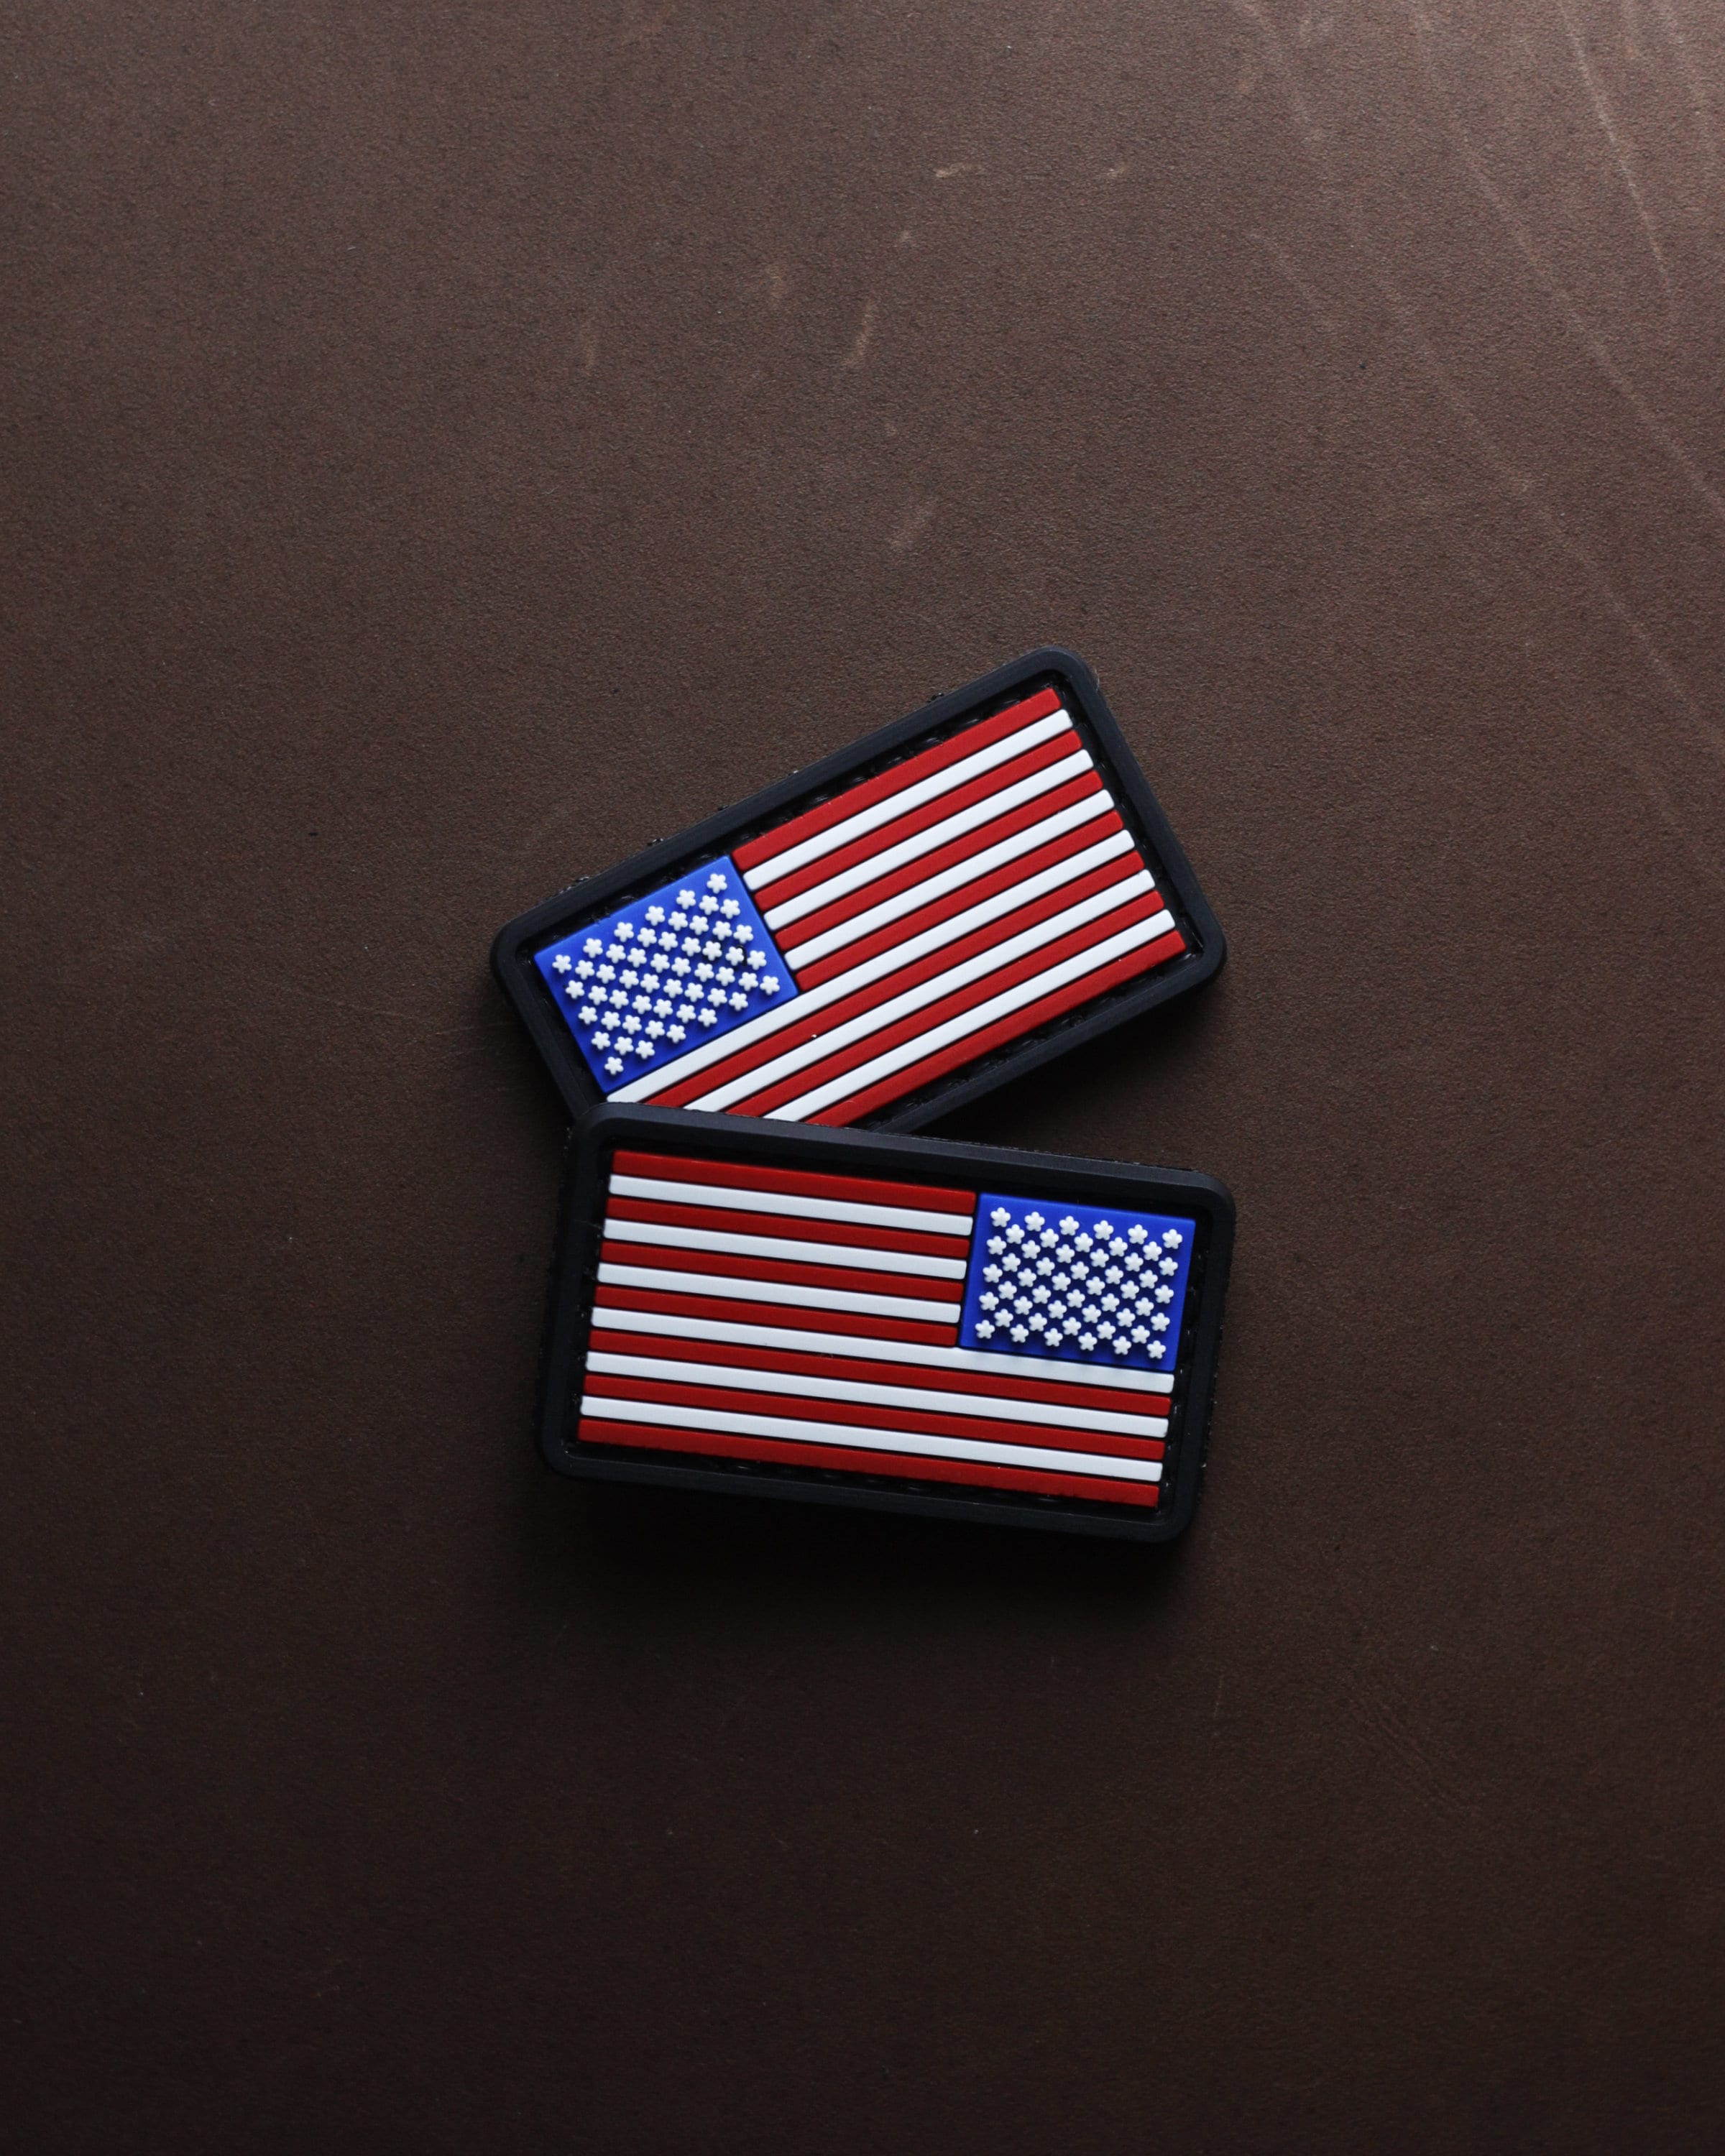 American Flag Patch United States of America, USA iron On